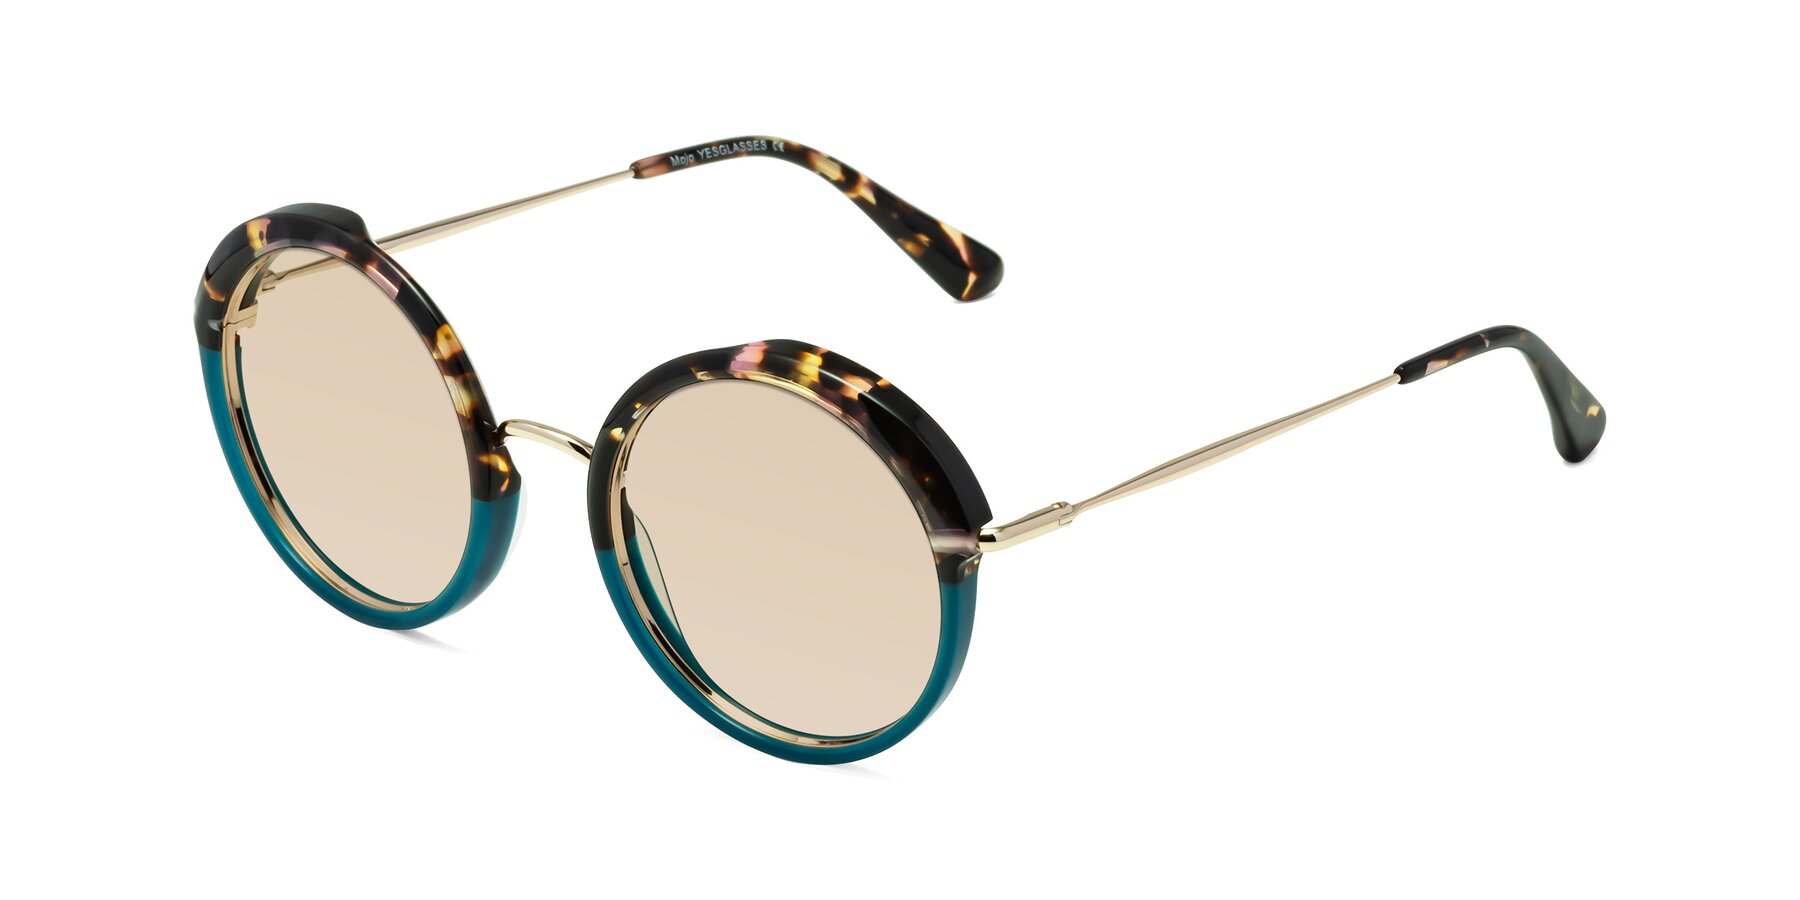 Angle of Mojo in Floral-Teal with Light Brown Tinted Lenses